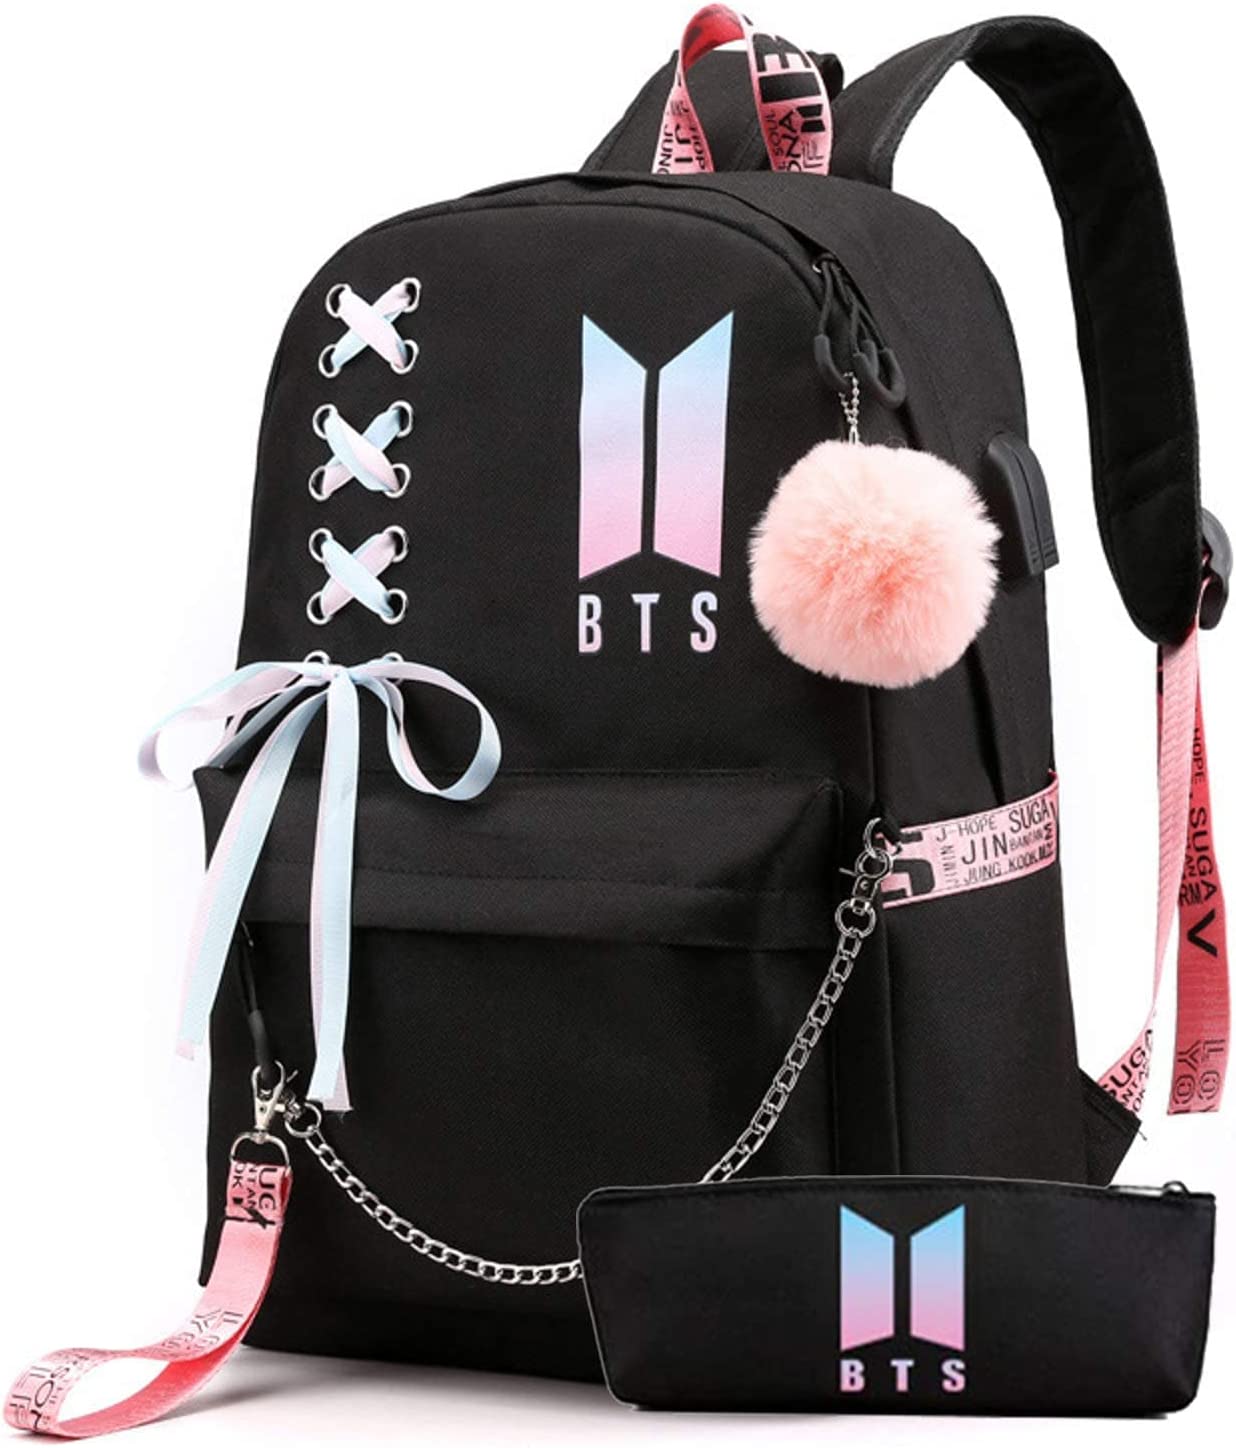 Kpop BTS Suga singers college school beg girls backpack with special BTS  Suga print for BTS army